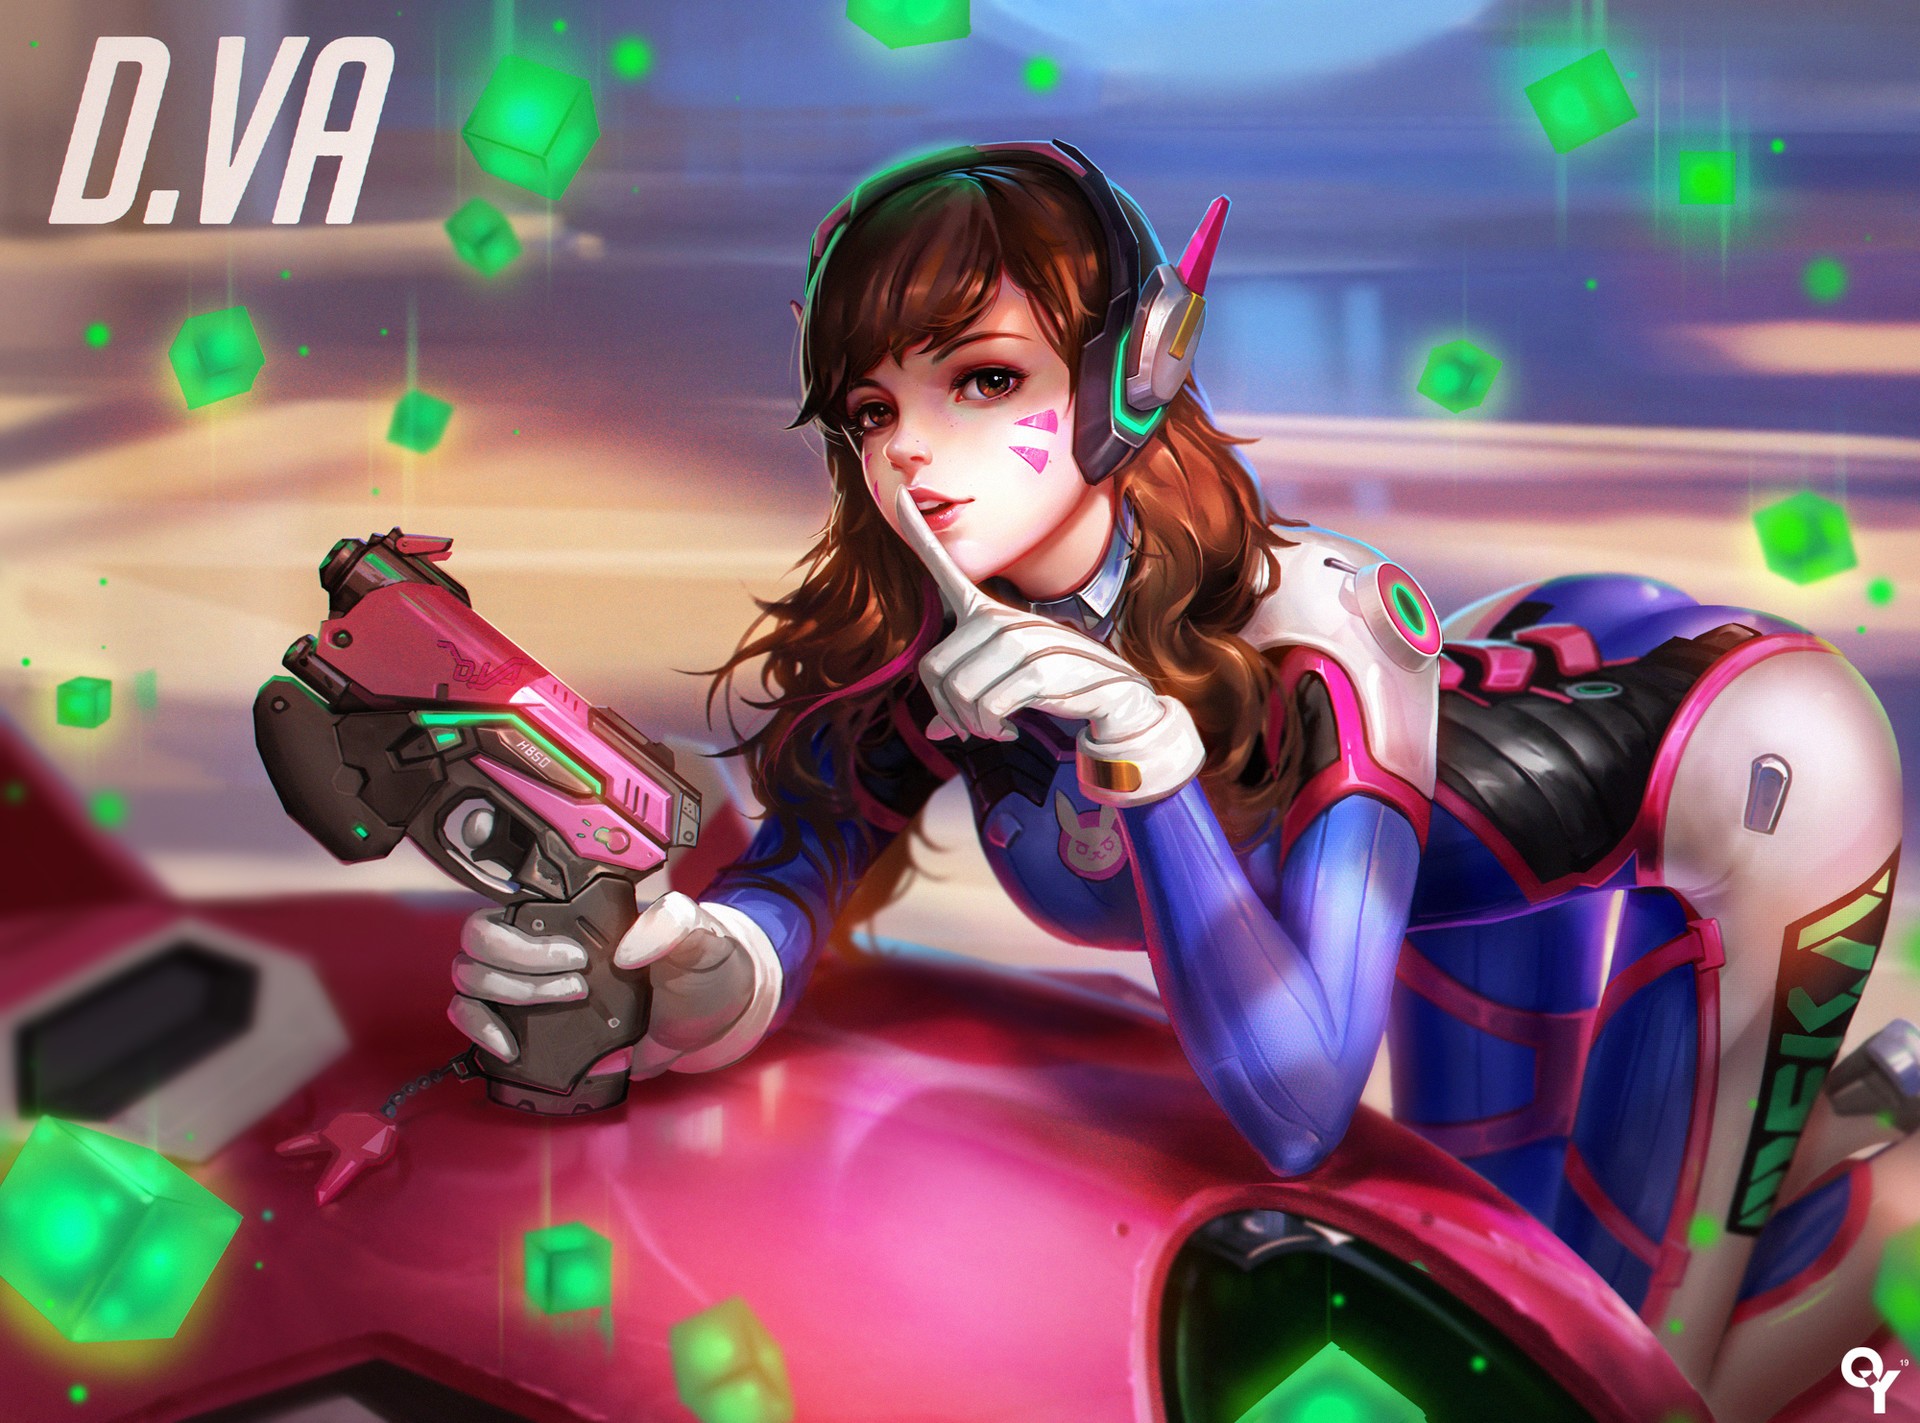 General 1920x1423 Overwatch D.Va (Overwatch) long hair bodysuit gun Blizzard Entertainment Jason Liang Overwatch Anniversary boobs dress ass brown eyes brunette gloves headphones realistic tattoo weapon video game girls girls with guns silence video game characters PC gaming bent over looking at viewer